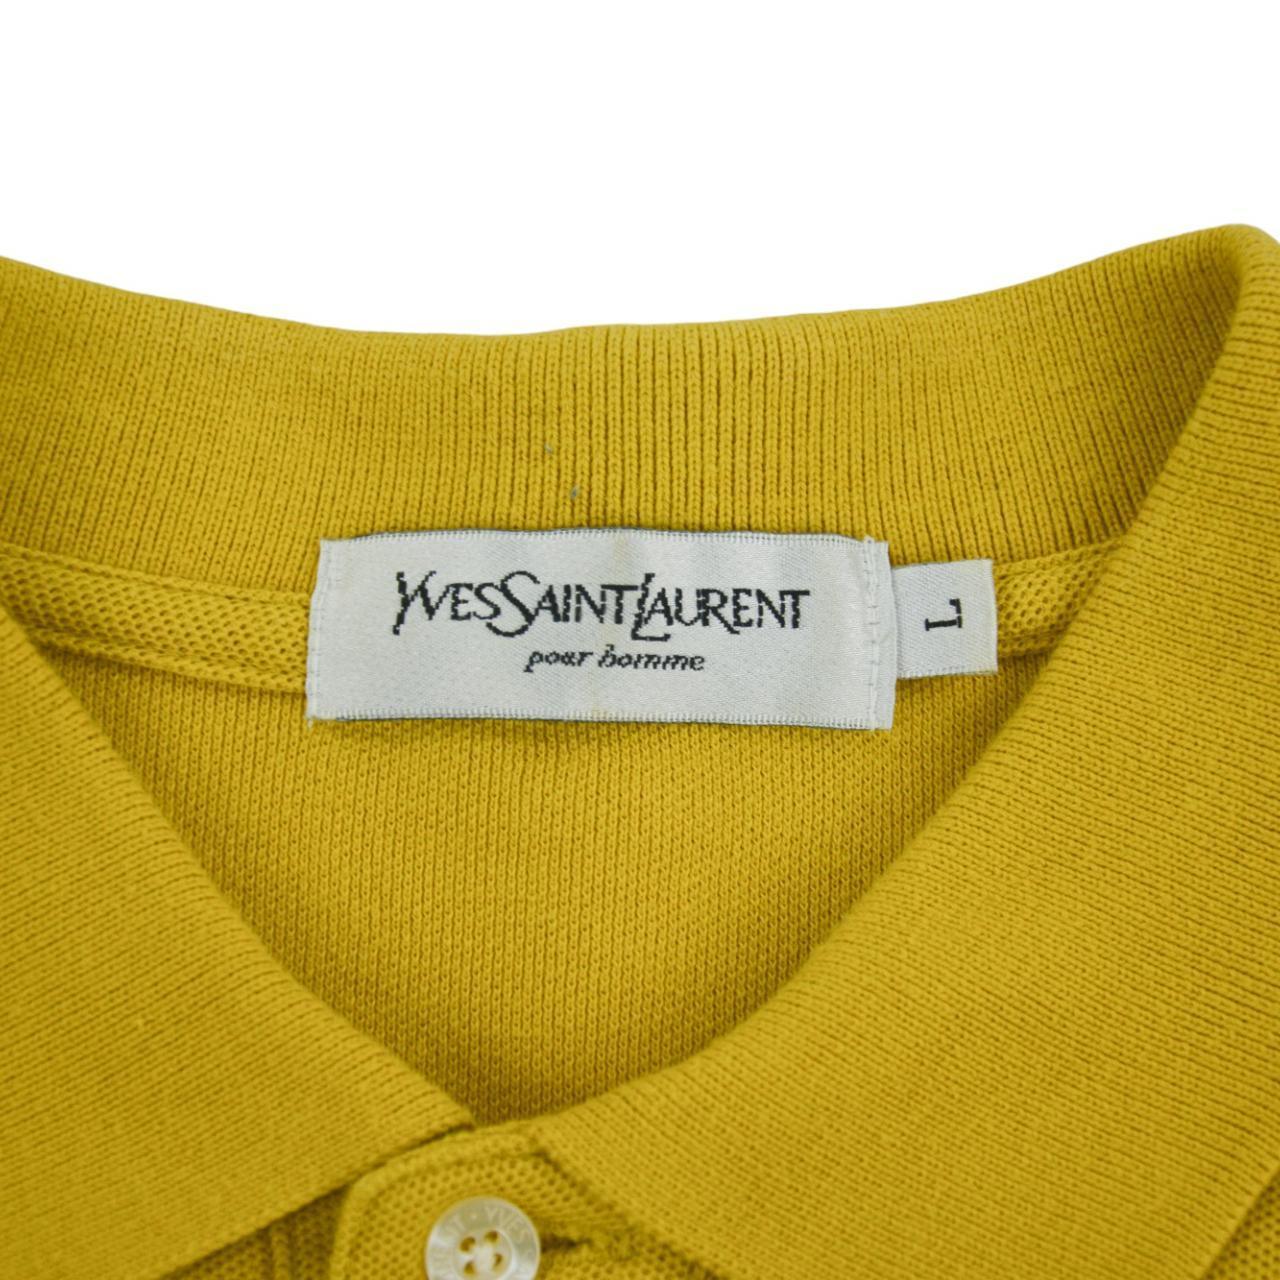 Vintage YSL Yves Saint Laurent Long Sleeve Polo Shirt Size L - Known Source